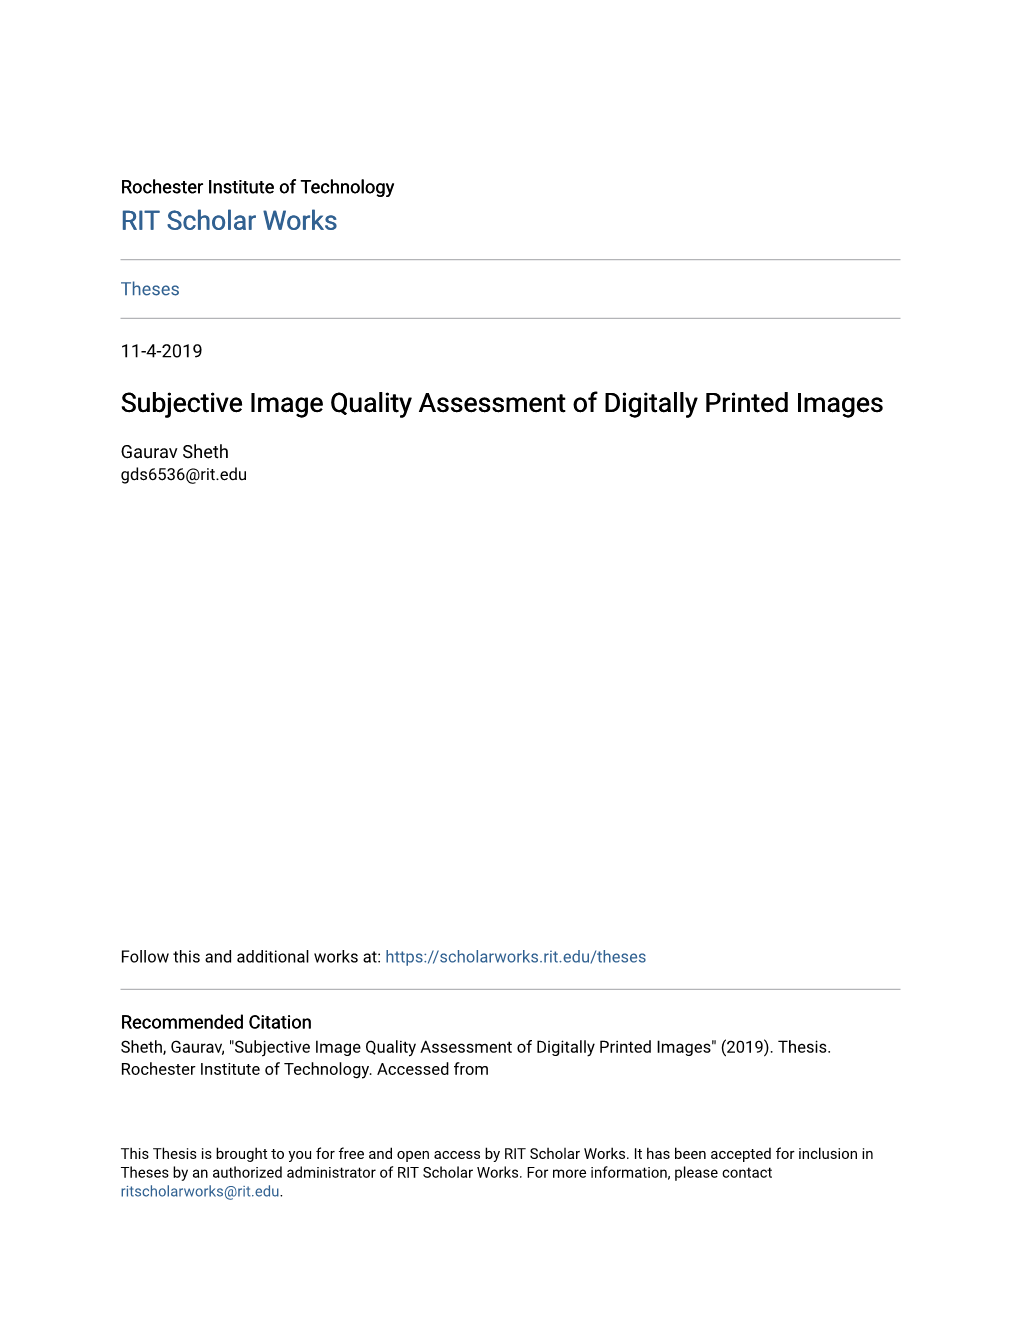 Subjective Image Quality Assessment of Digitally Printed Images